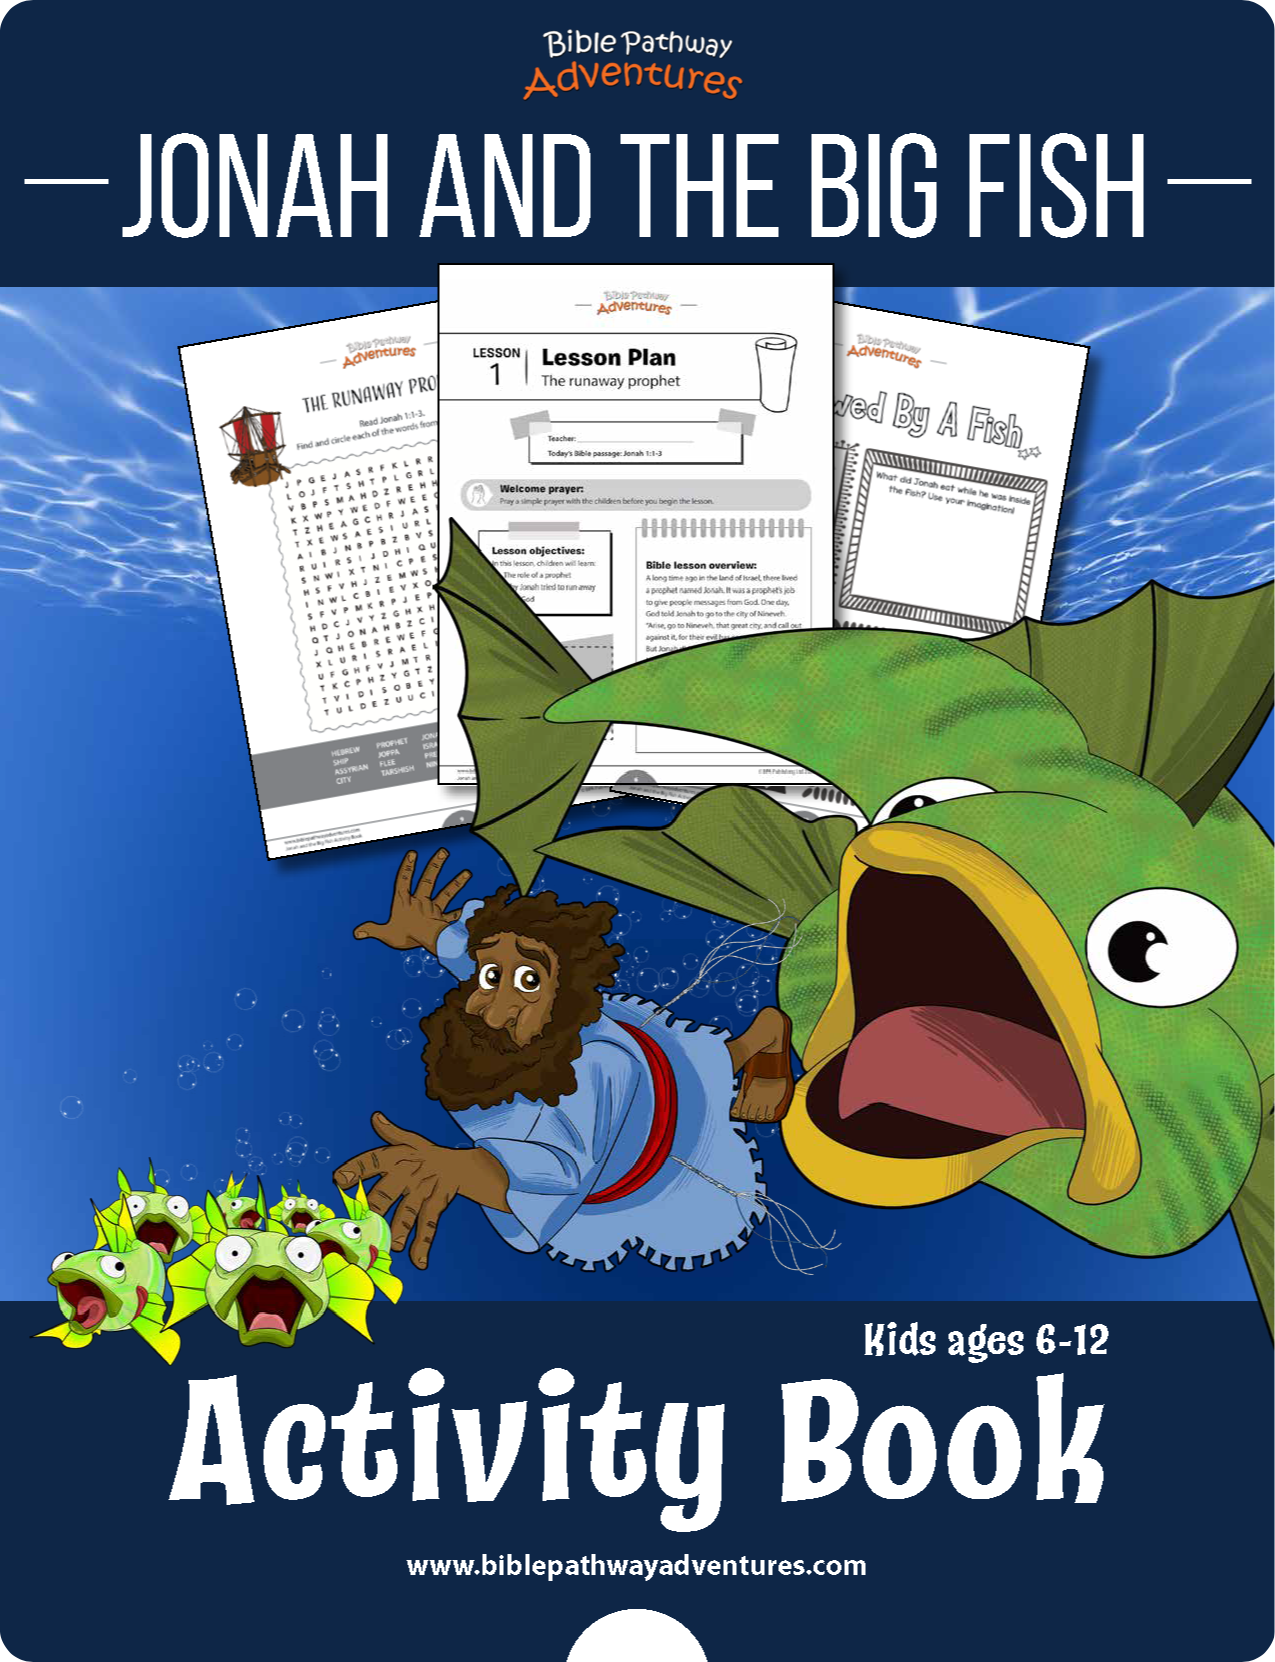 Jonah and the Big Fish Activity Book book cover